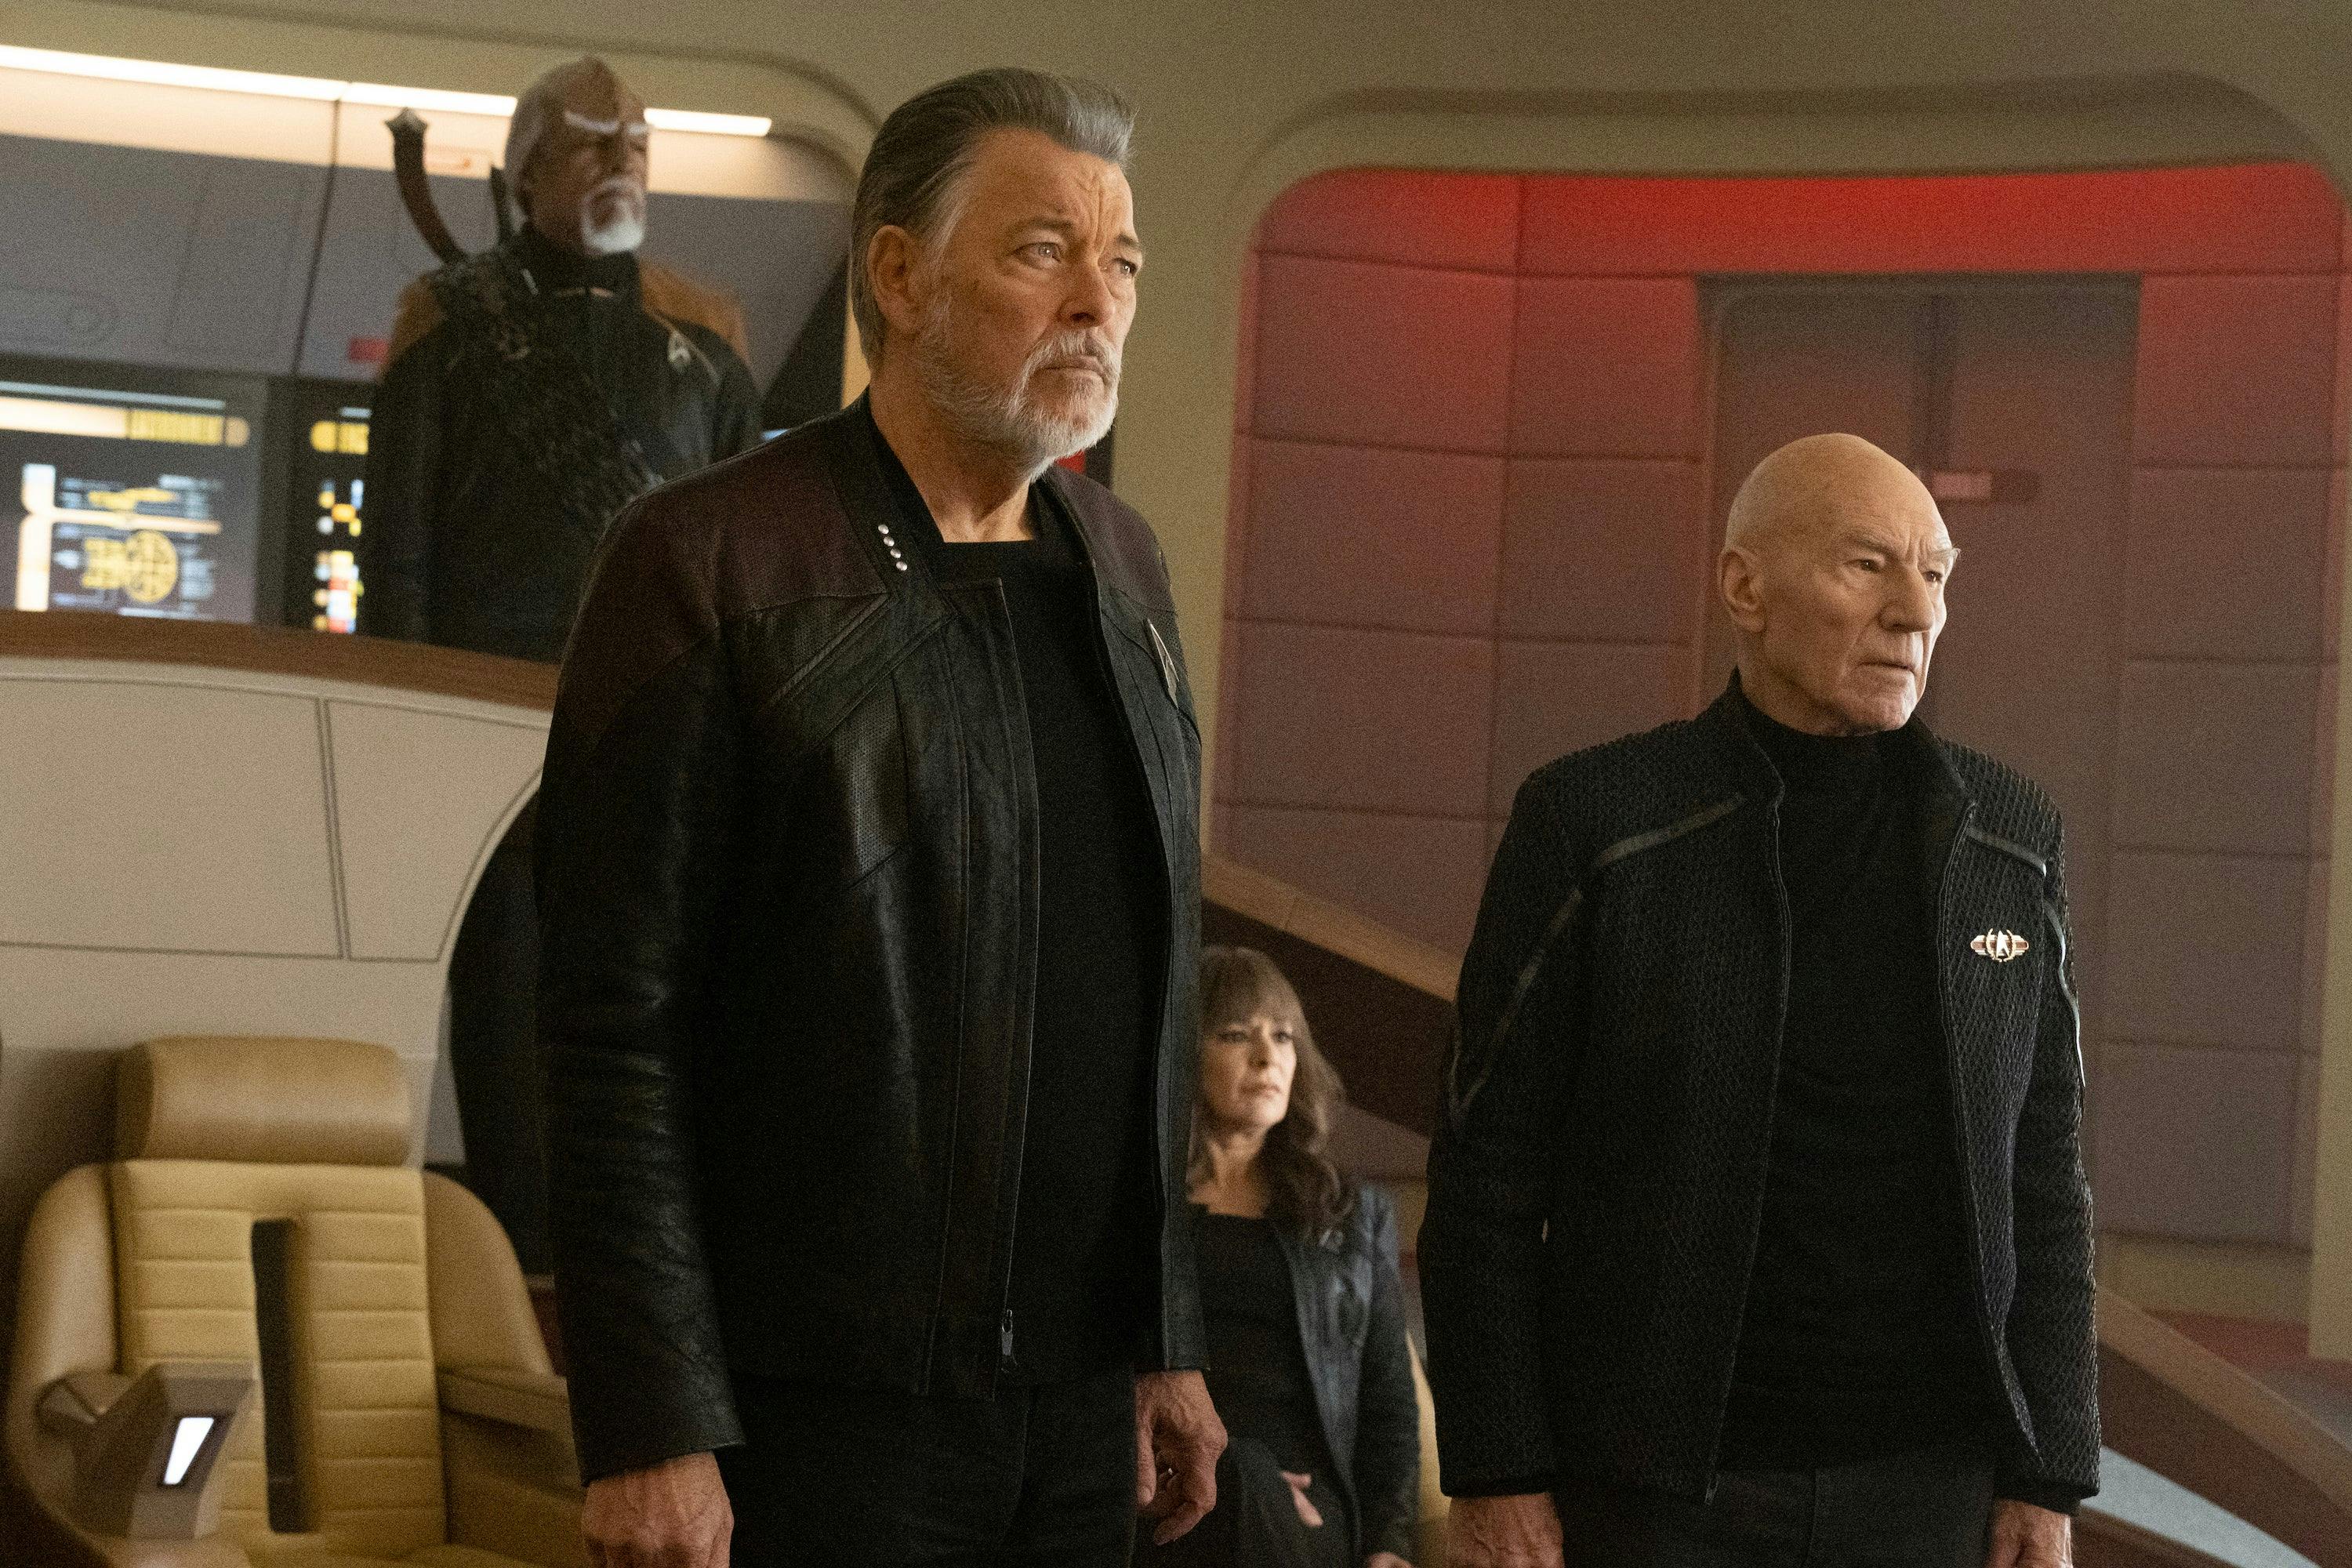 Will Riker and Jean-Luc Picard stand in front of their chairs in response to what they see on the viewscreen, with Deanna seated and Worf standing behind them in 'The Last Generation'